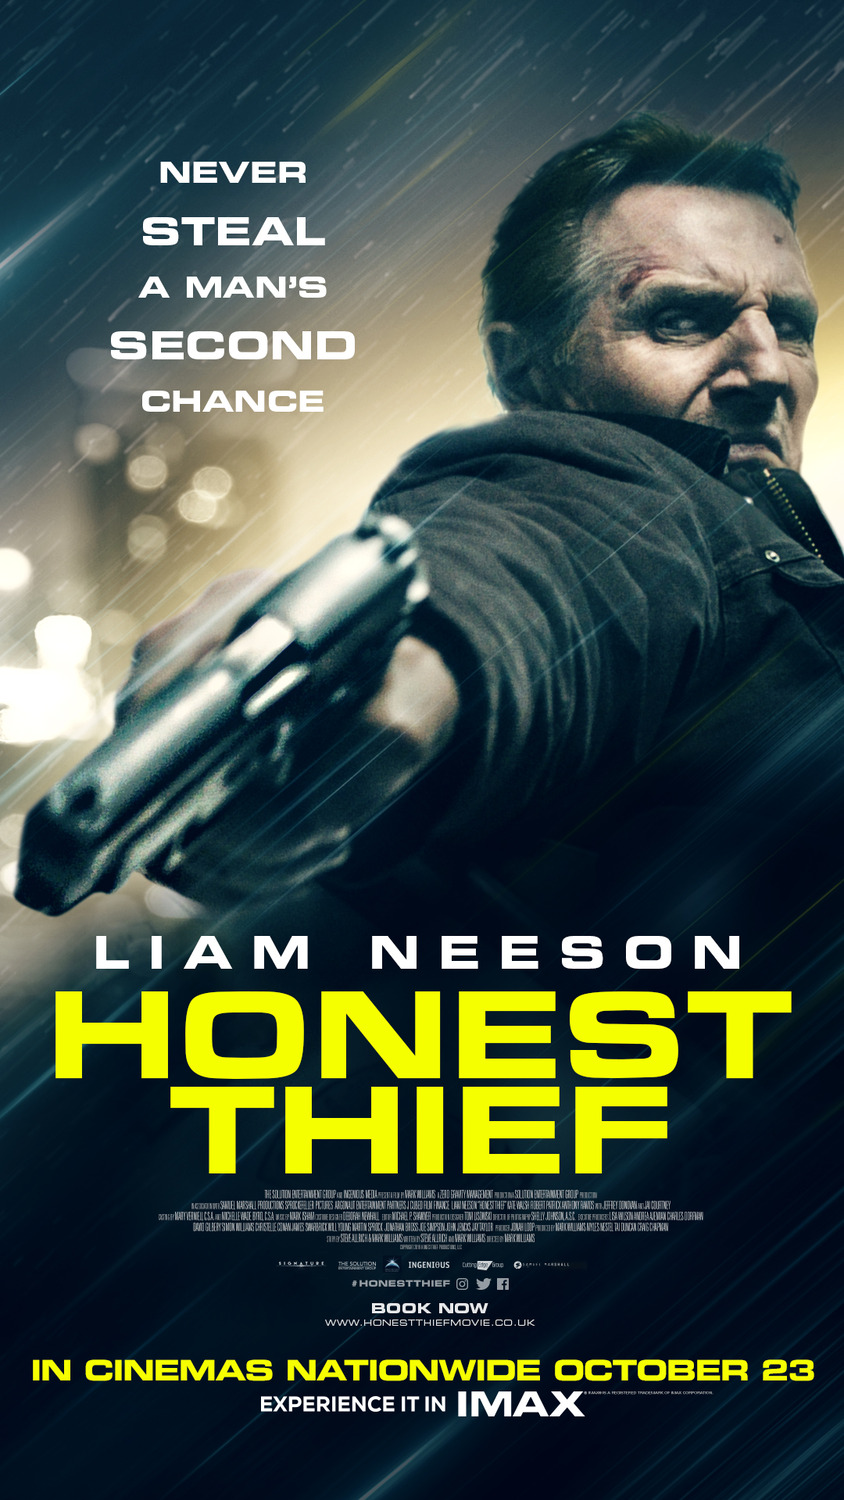 Liam - Liam Neeson's Honest Thief Tops NGN Box Office With N7 Million Opening